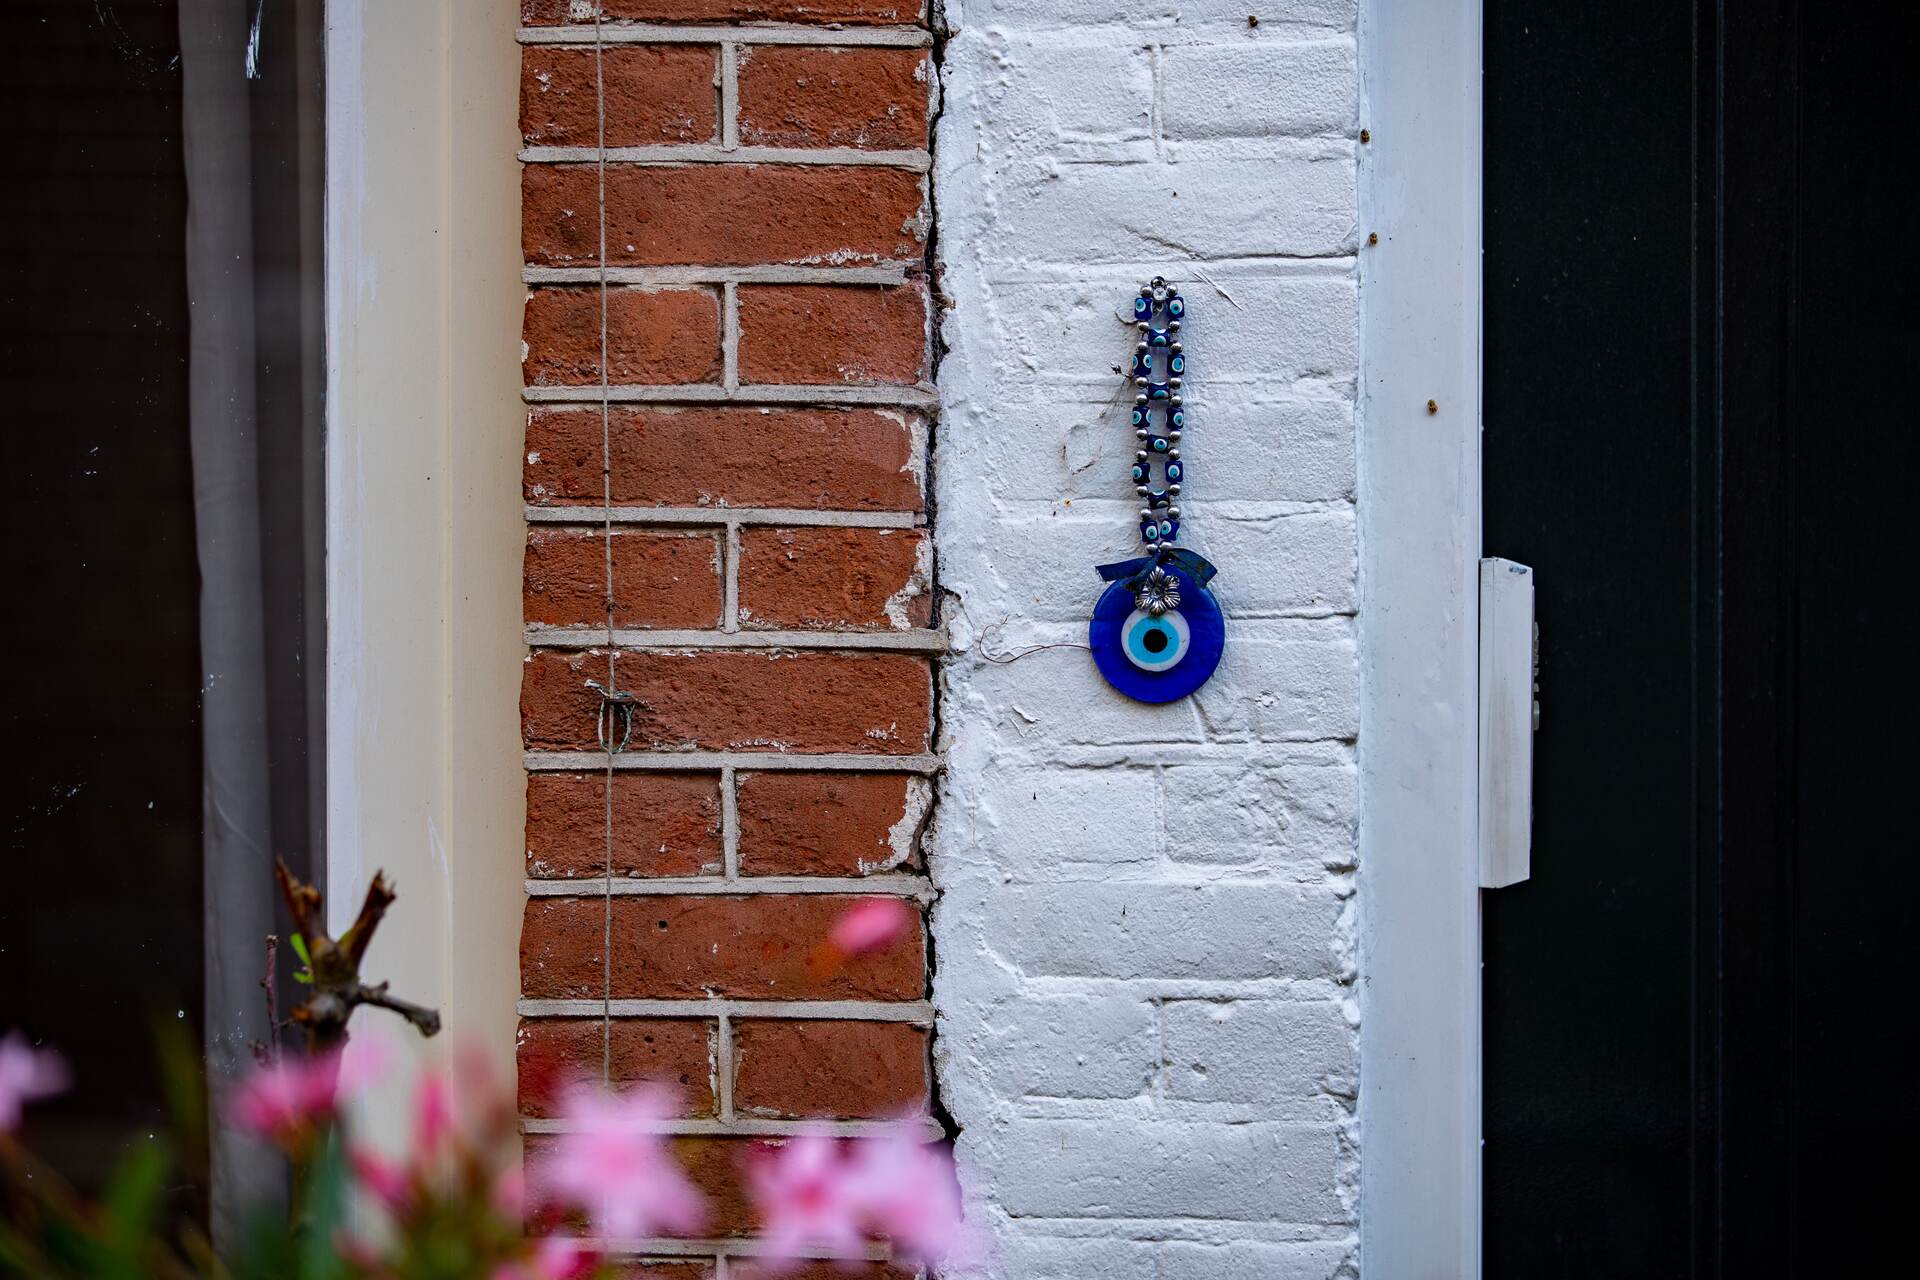 An evil eye charm hanging on a wall